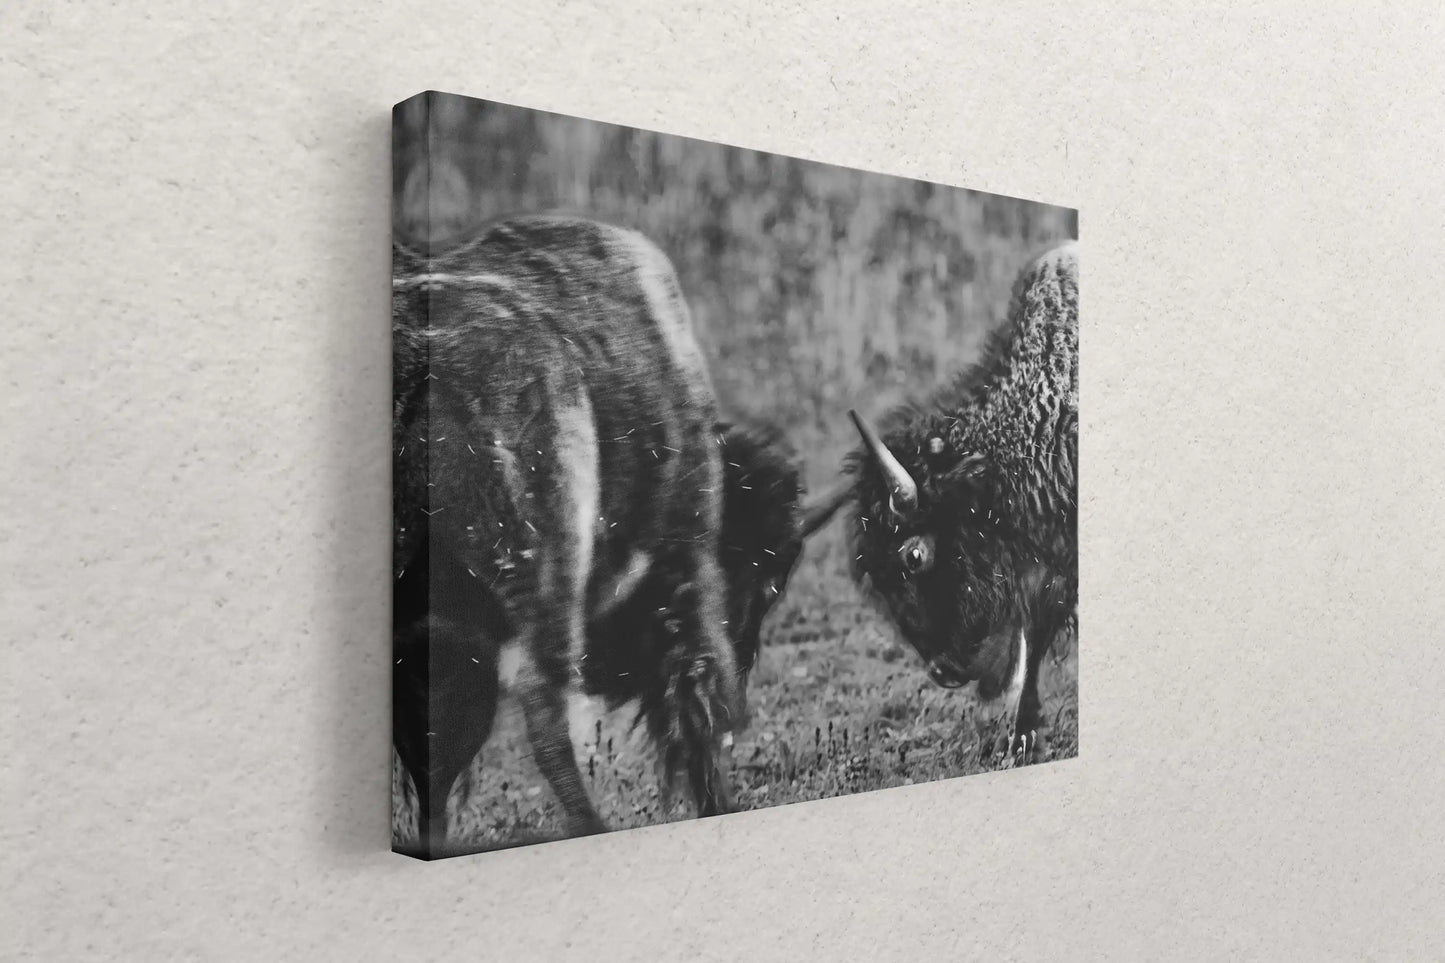 Side view of a black and white canvas print of dueling bison, showing the thickness and hanging hardware, against a textured wall.